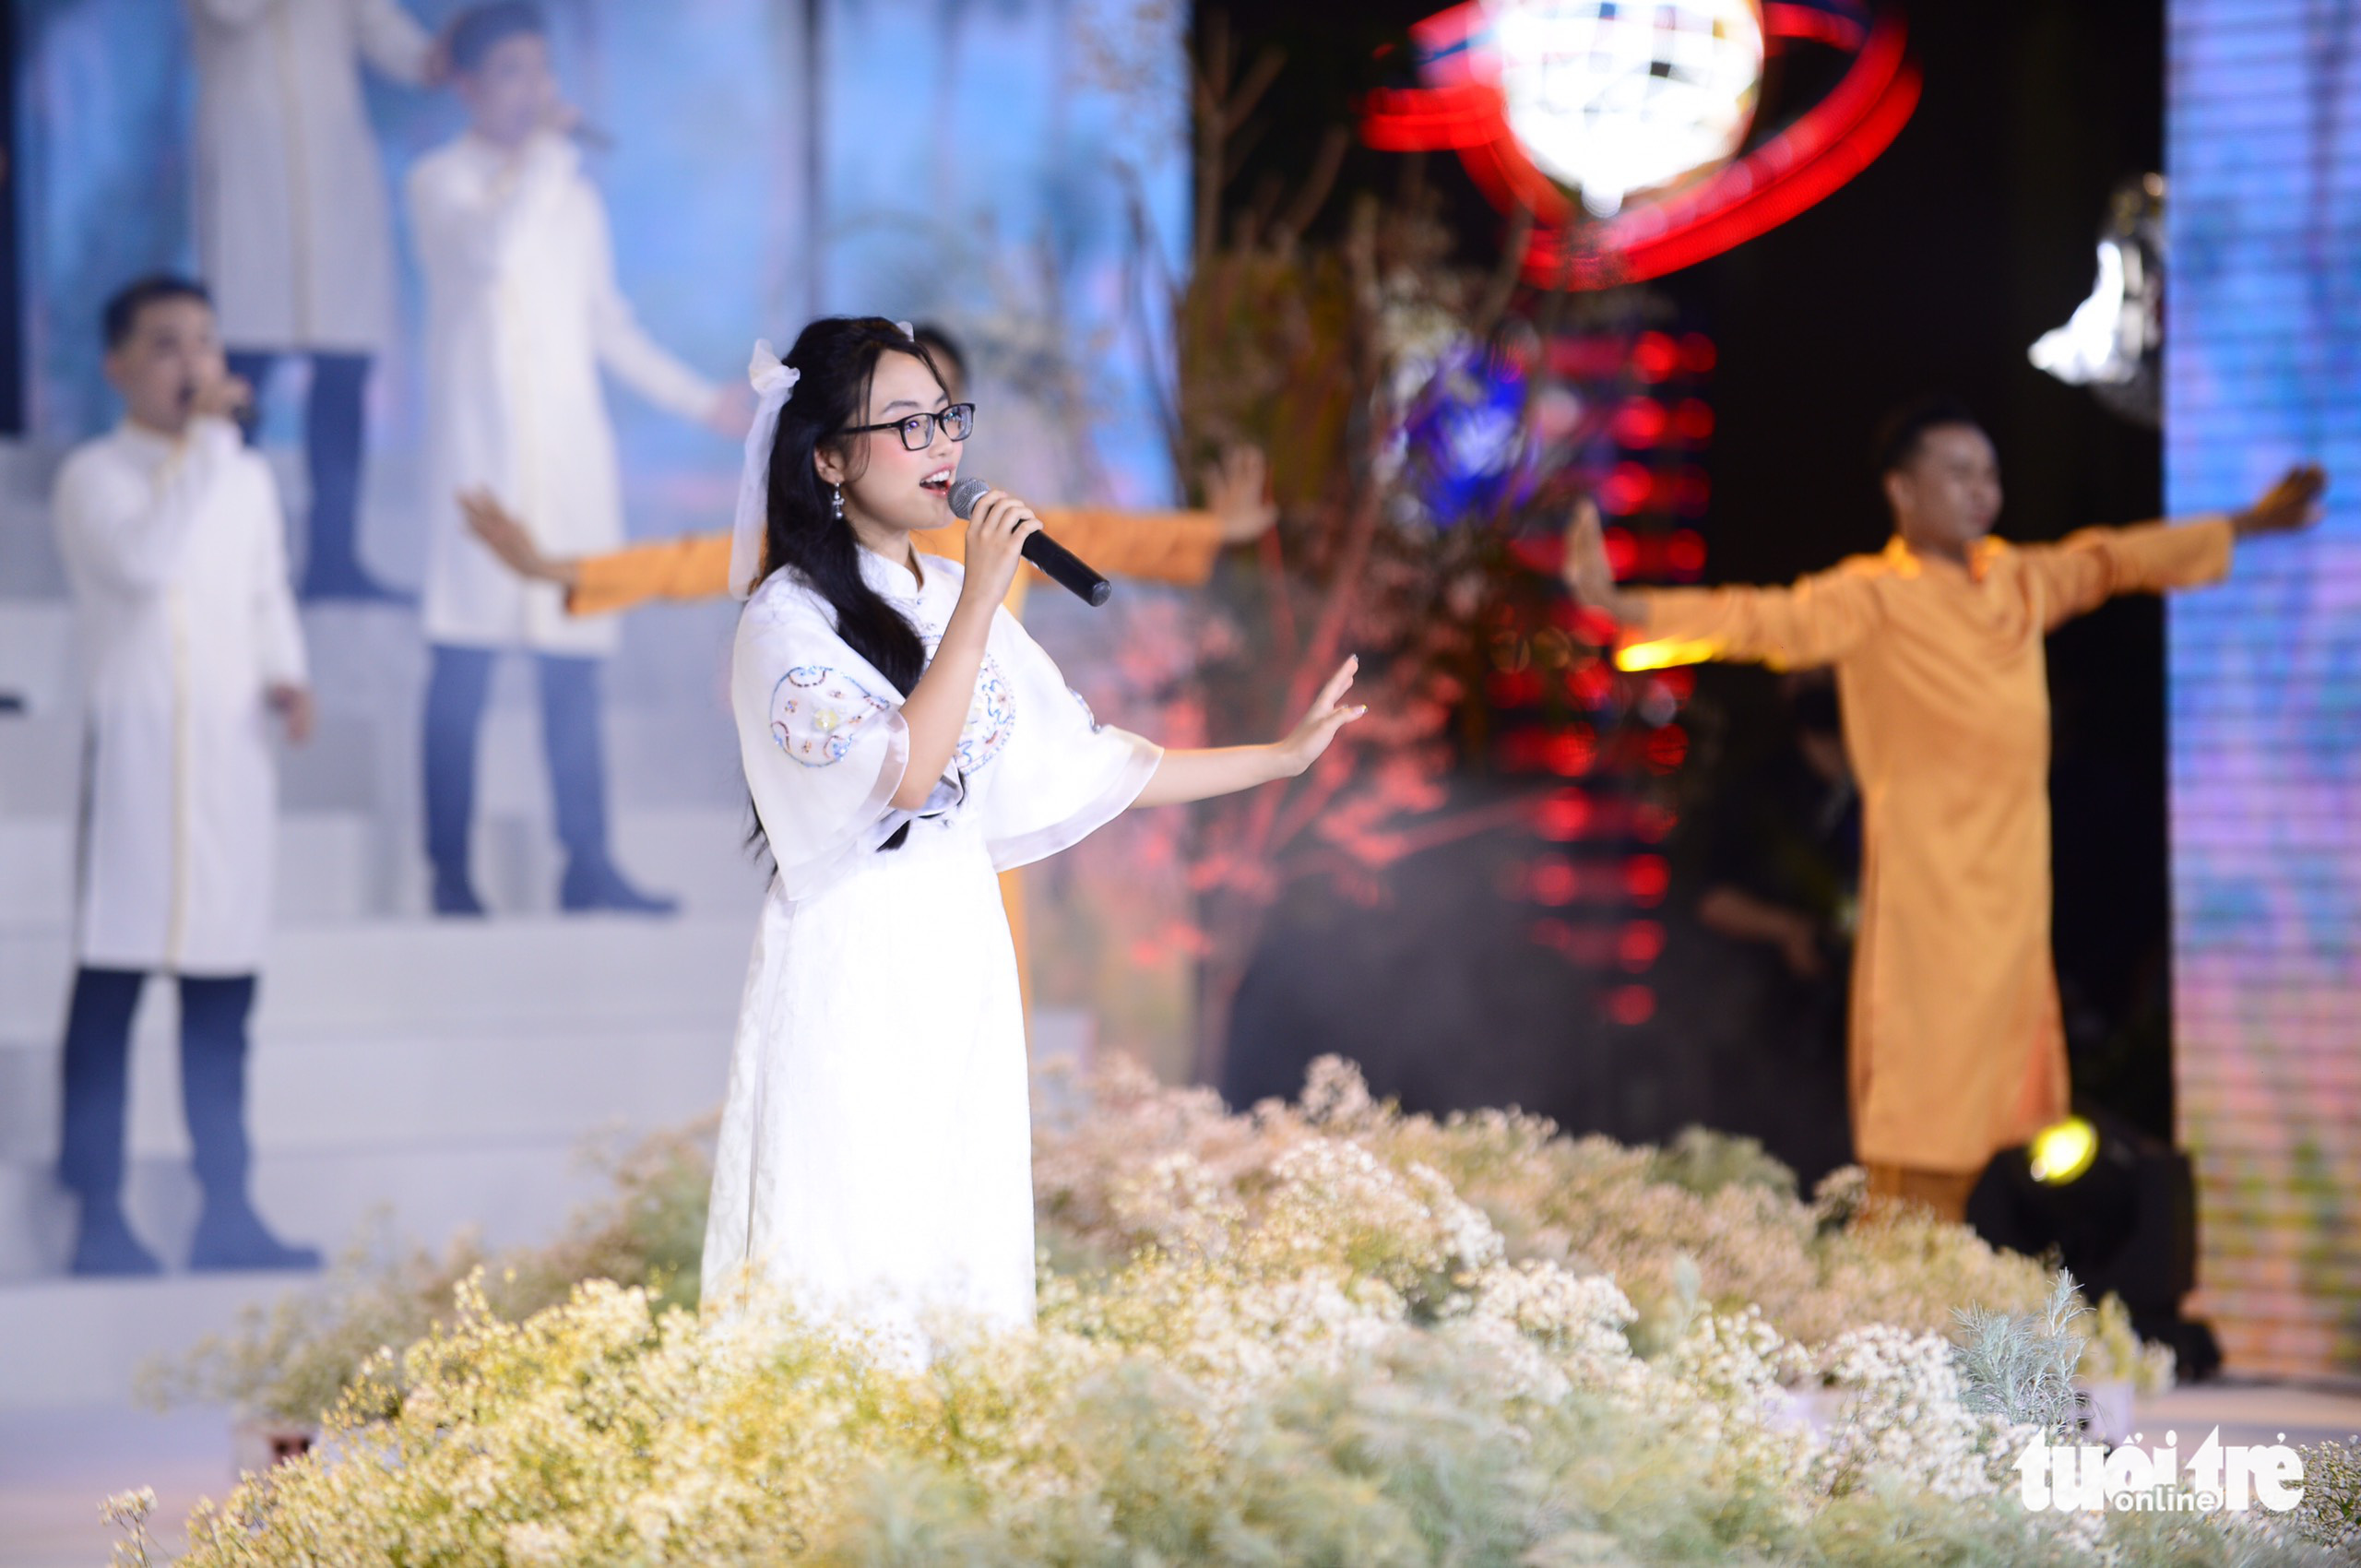 Singer Phuong My Chi performs at the opening ceremony of the Ho Chi Minh City Ao Dai Festival, March 5, 2022. Photo: Quang Dinh / Tuoi Tre